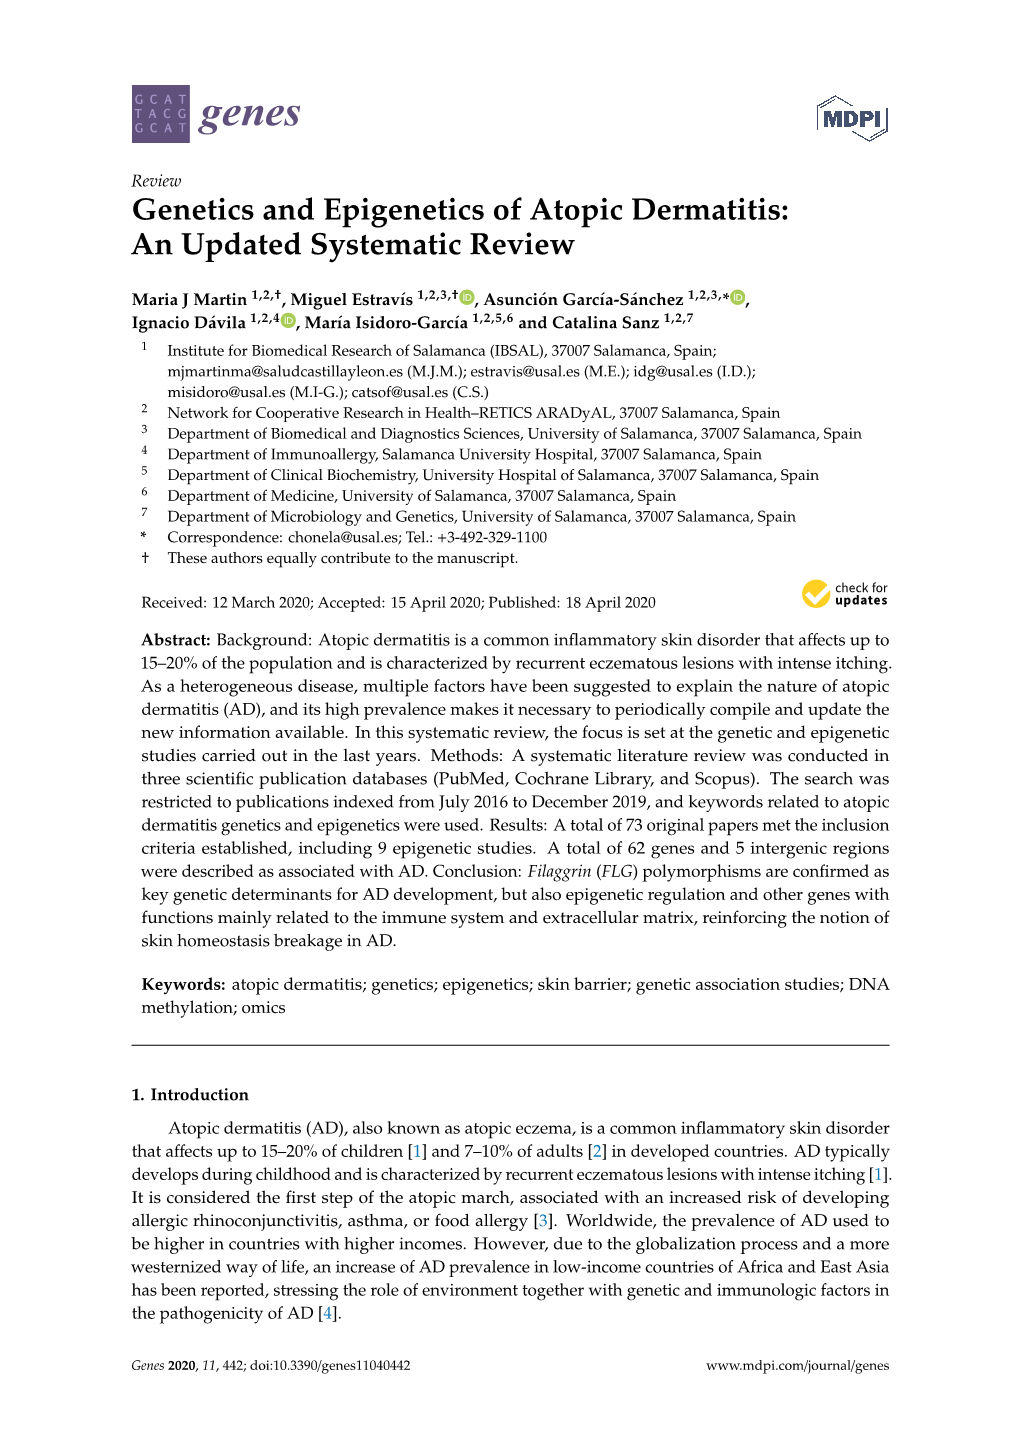 Genetics and Epigenetics of Atopic Dermatitis: an Updated Systematic Review